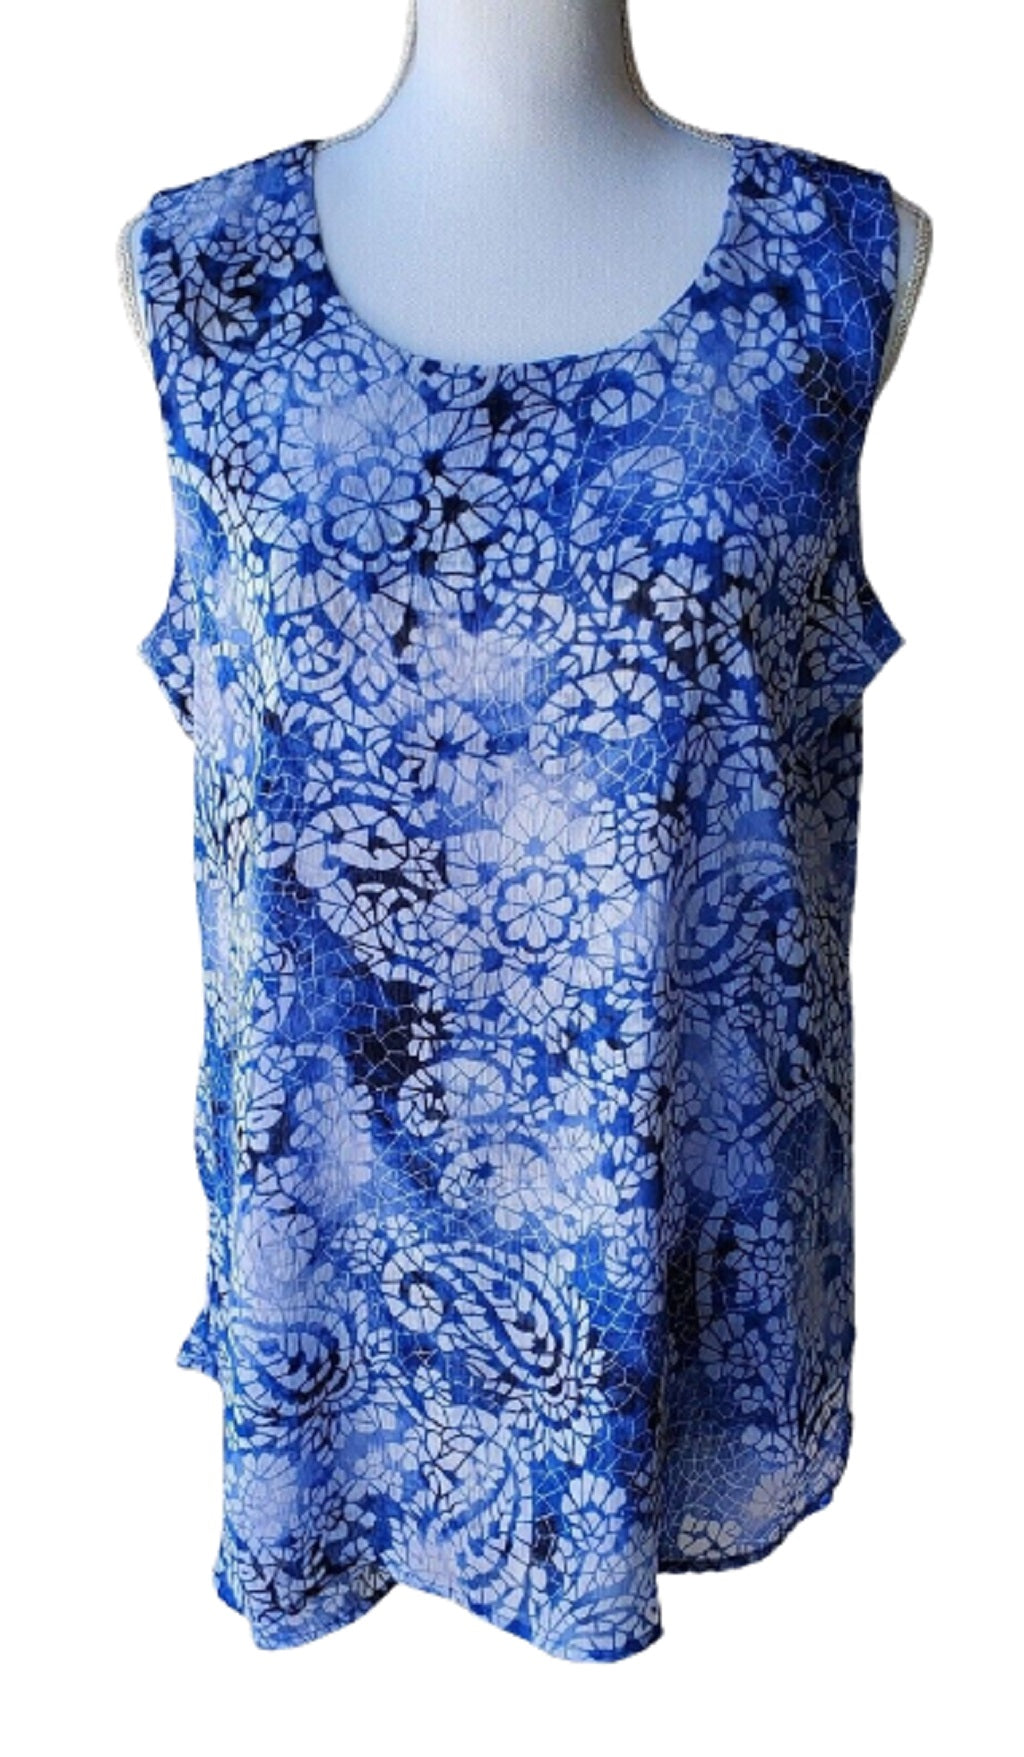 Fever Womens Paisley Floral Sleeveless Blouse